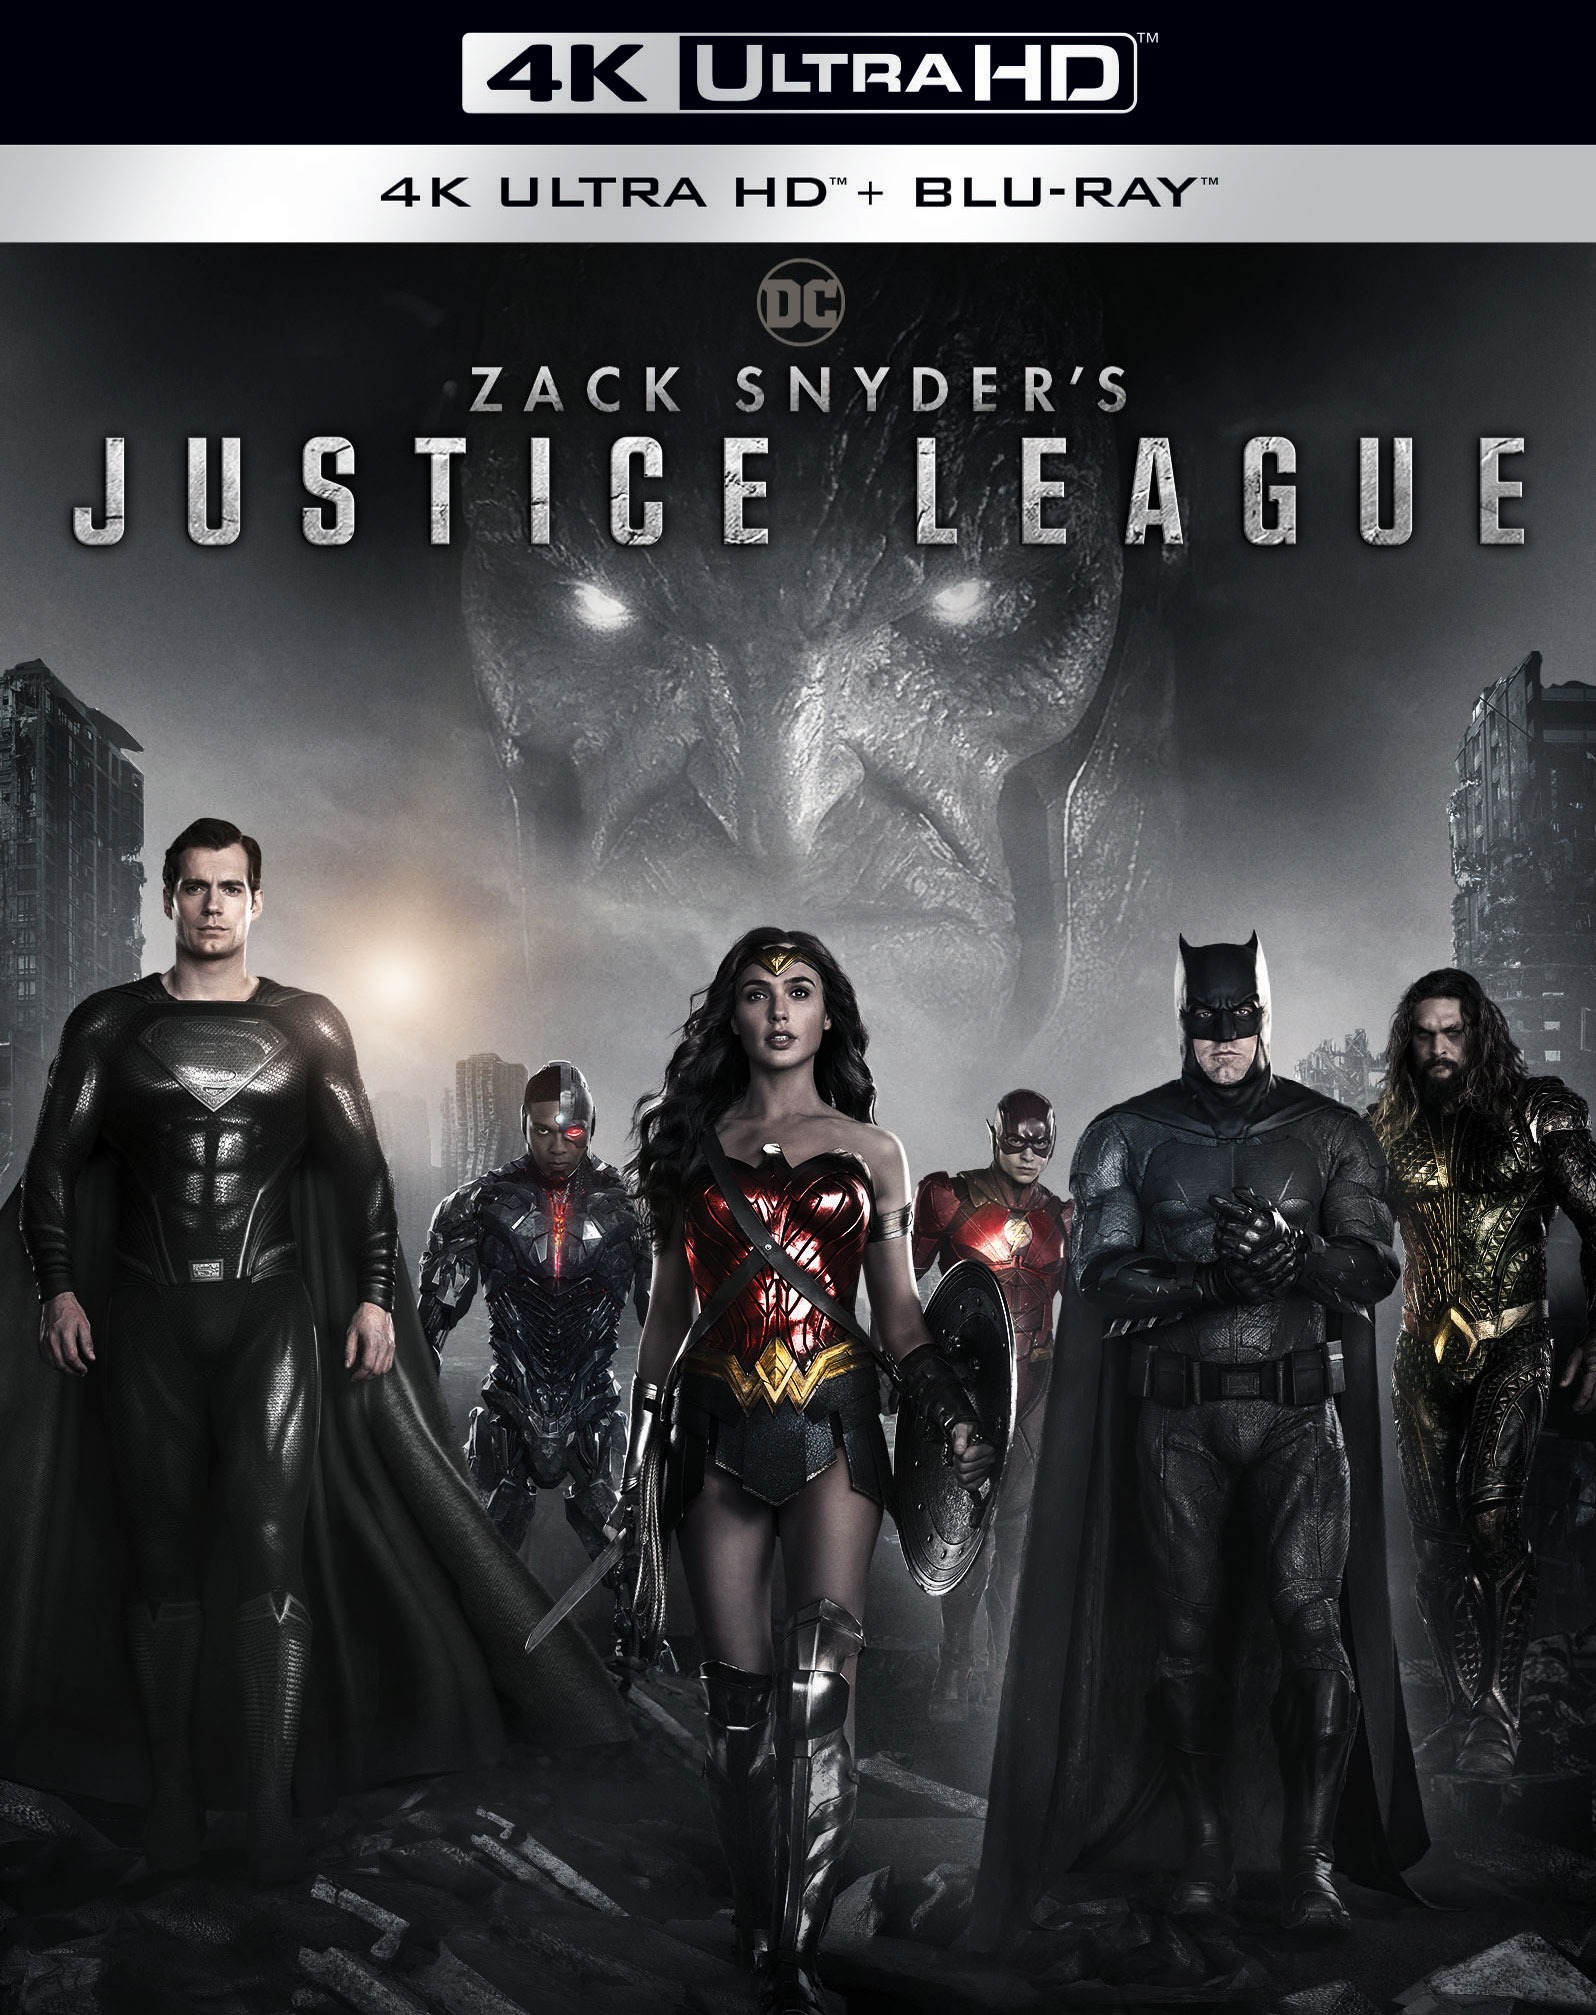 Zack Snyders Justice League 2 2021 Imax 4k 2160p Remux Uhd Hdr10 1080p Bluray Remux 